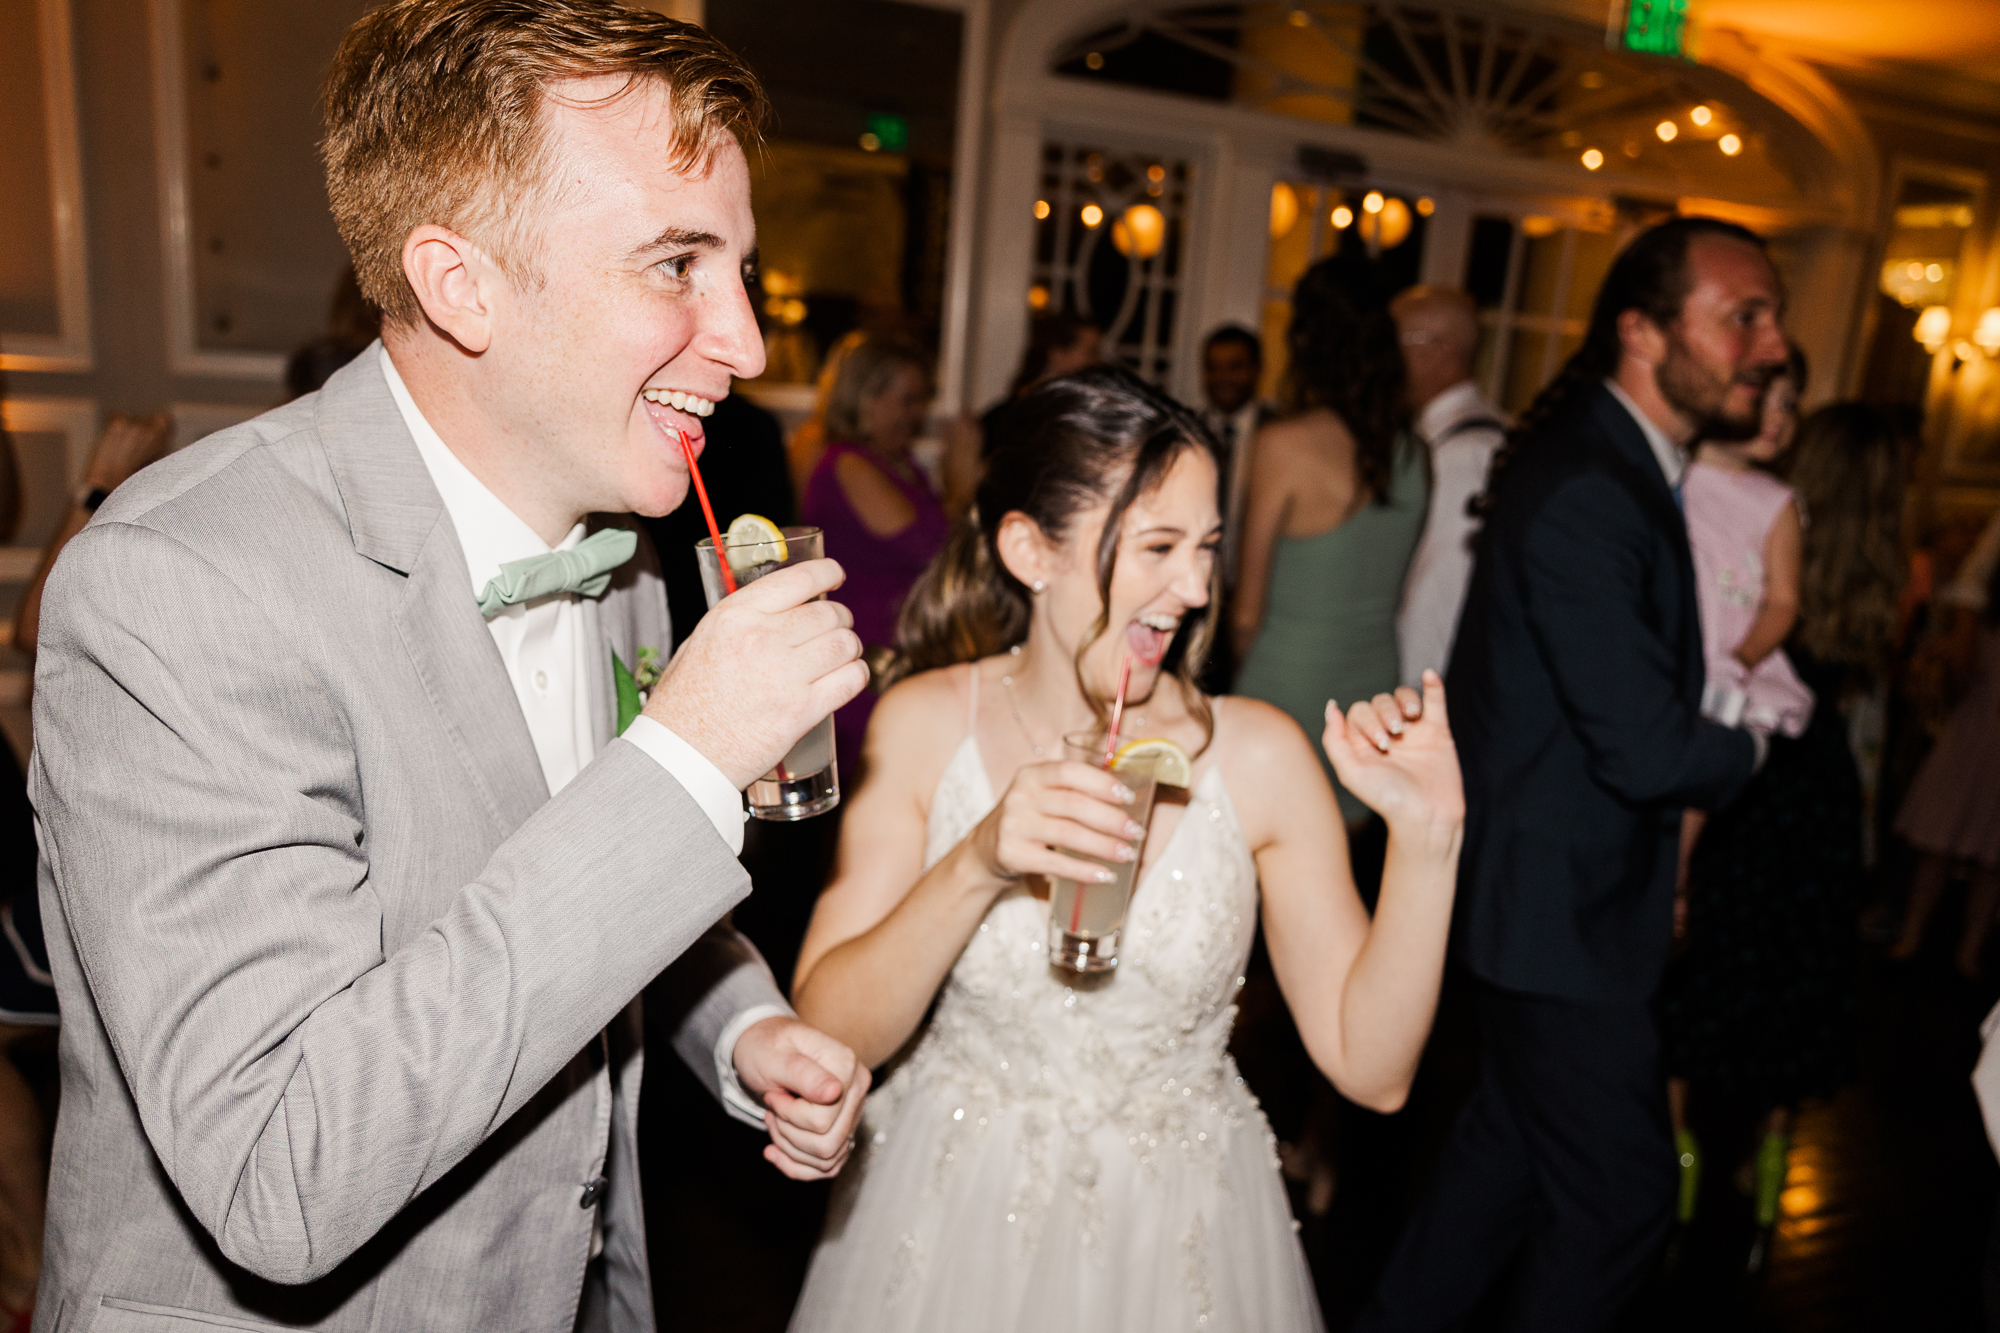 Fun Wedding at Briarcliff Manor in Summertime